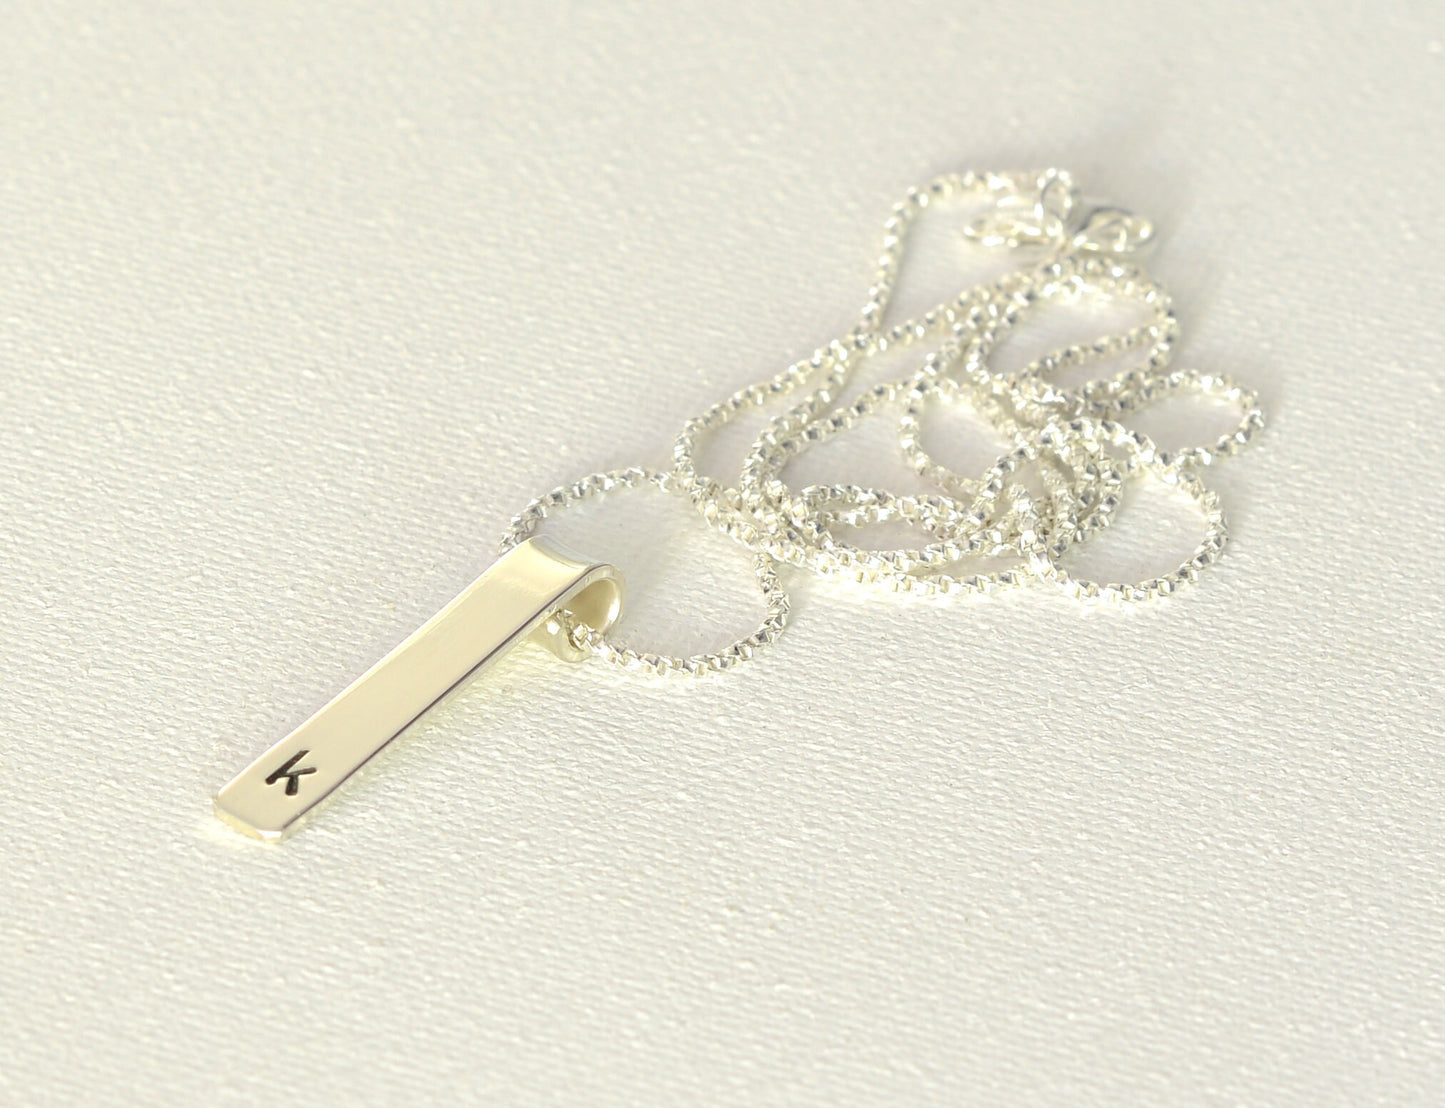 Dainty Tag personalized necklace in sterling silver